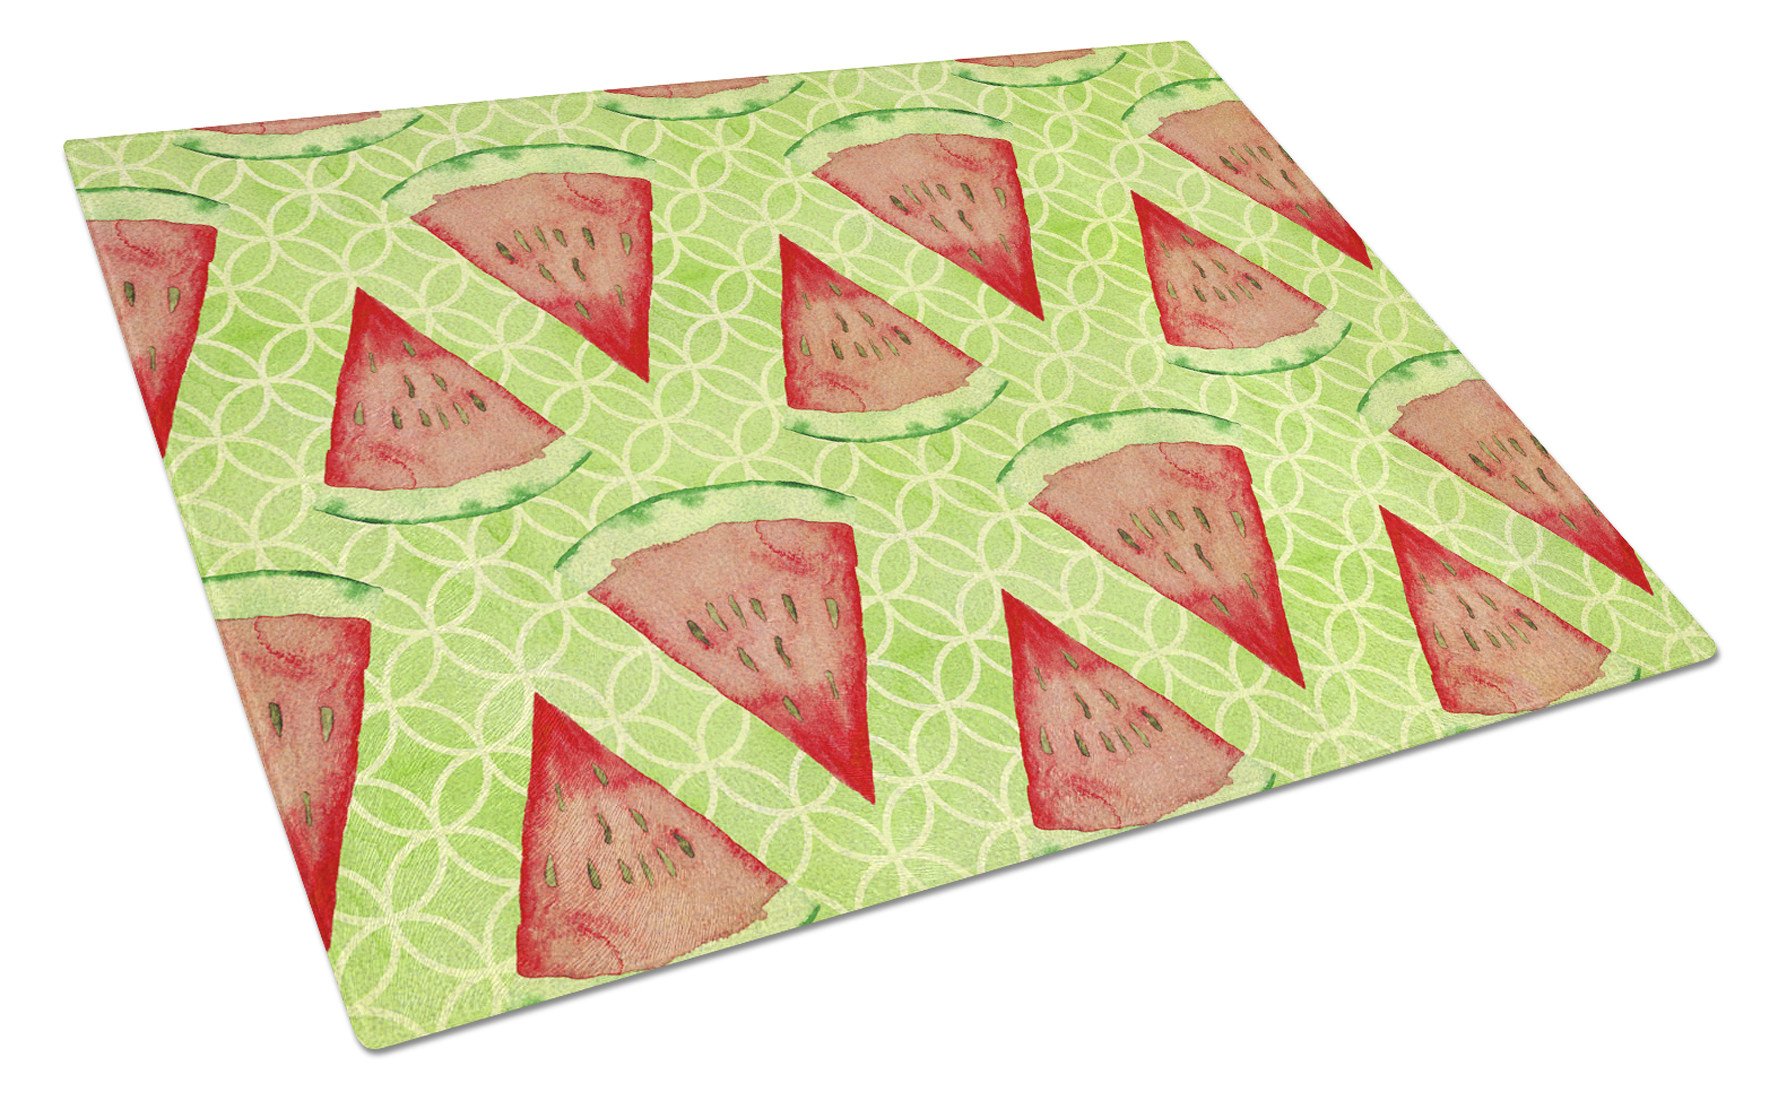 Watercolor Watermelon Glass Cutting Board Large BB7518LCB by Caroline's Treasures